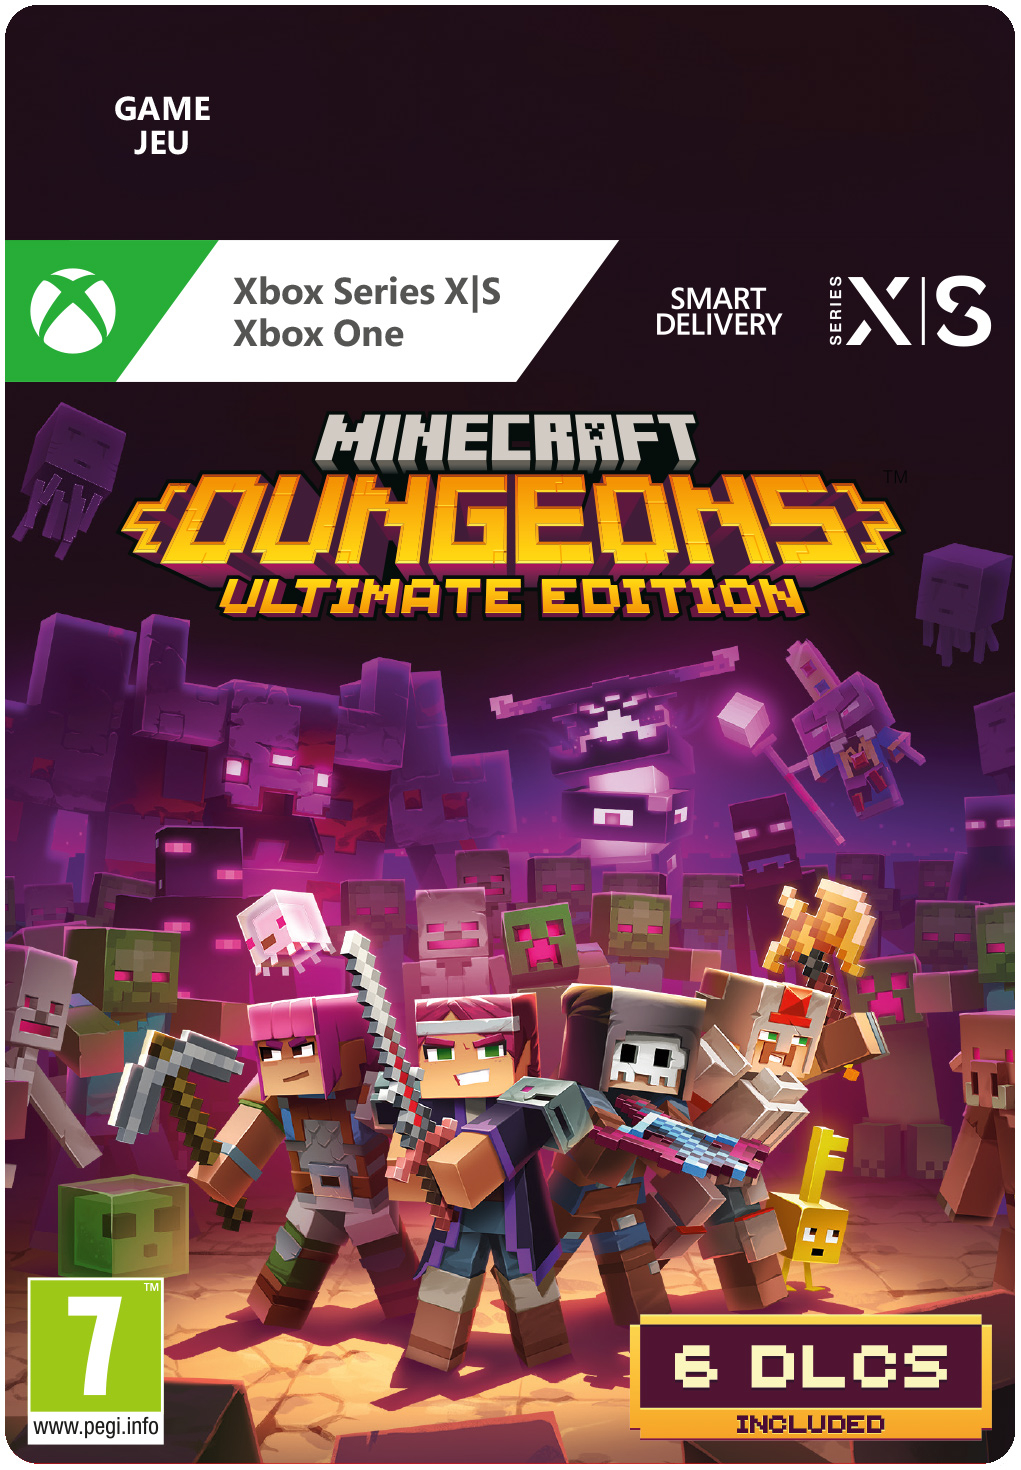 Minecraft Dungeons: Ultimate Edition - Xbox Series X|S/One - 15th Anniversary Sale